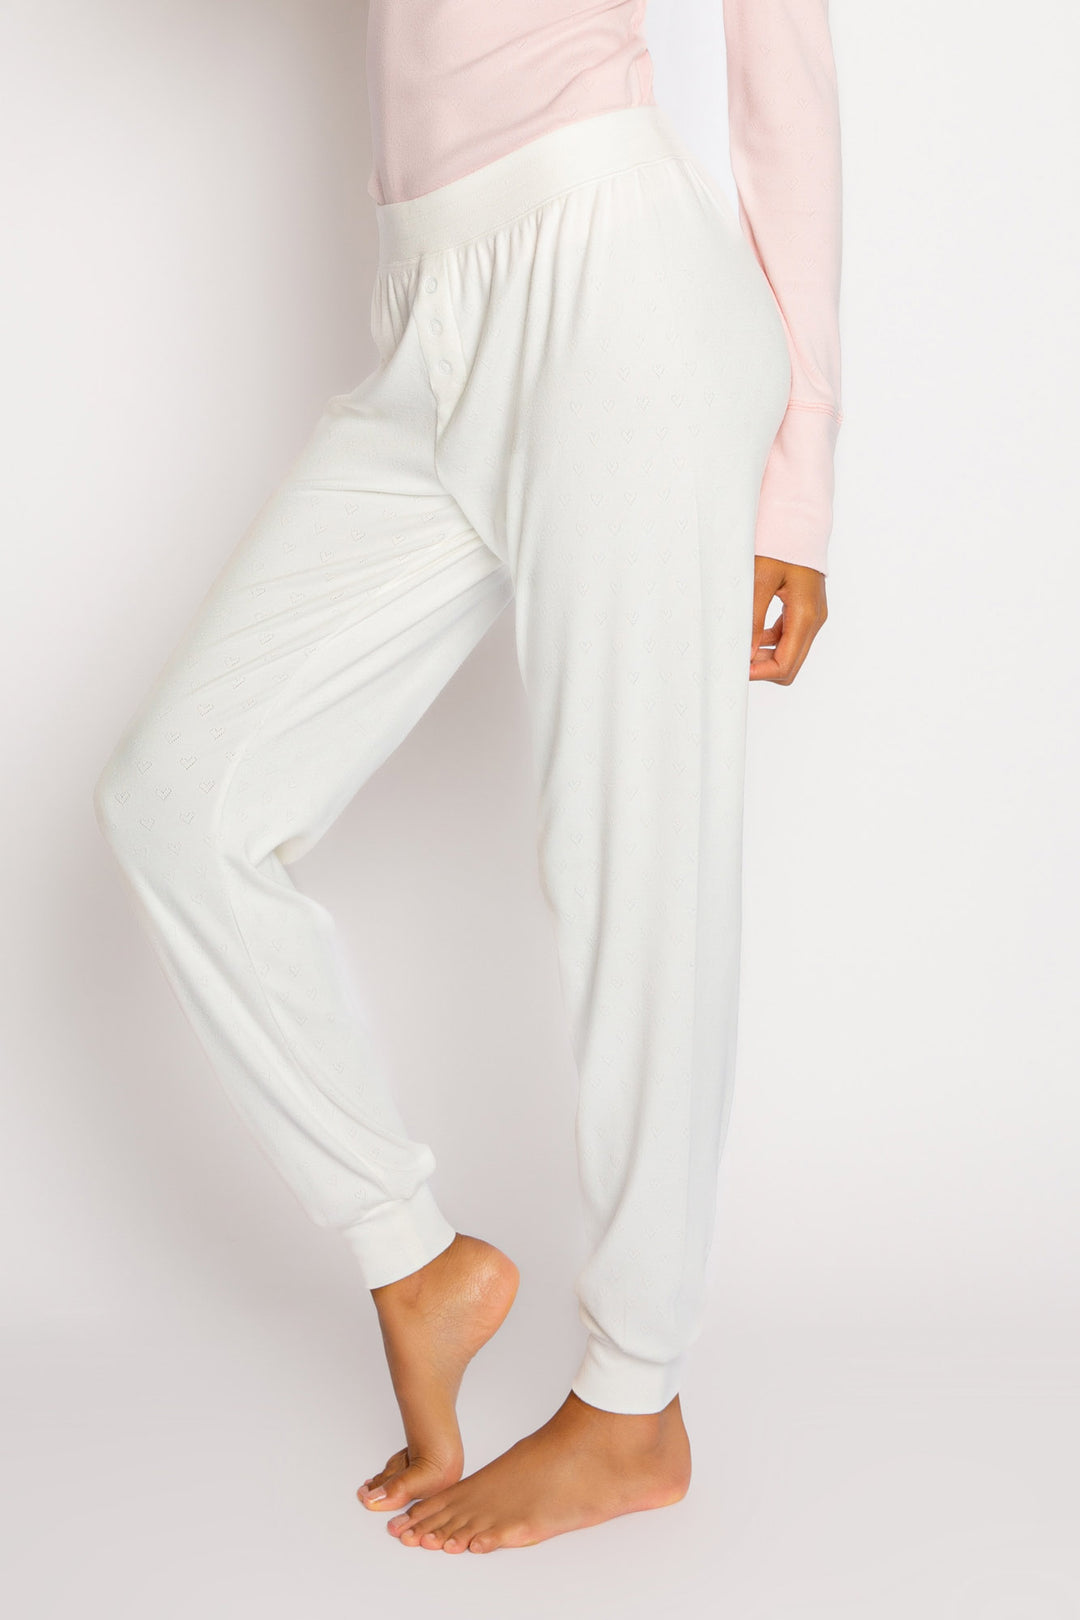 PJ Salvage All Things Love Banded Knit Jogger Pant in Ivory